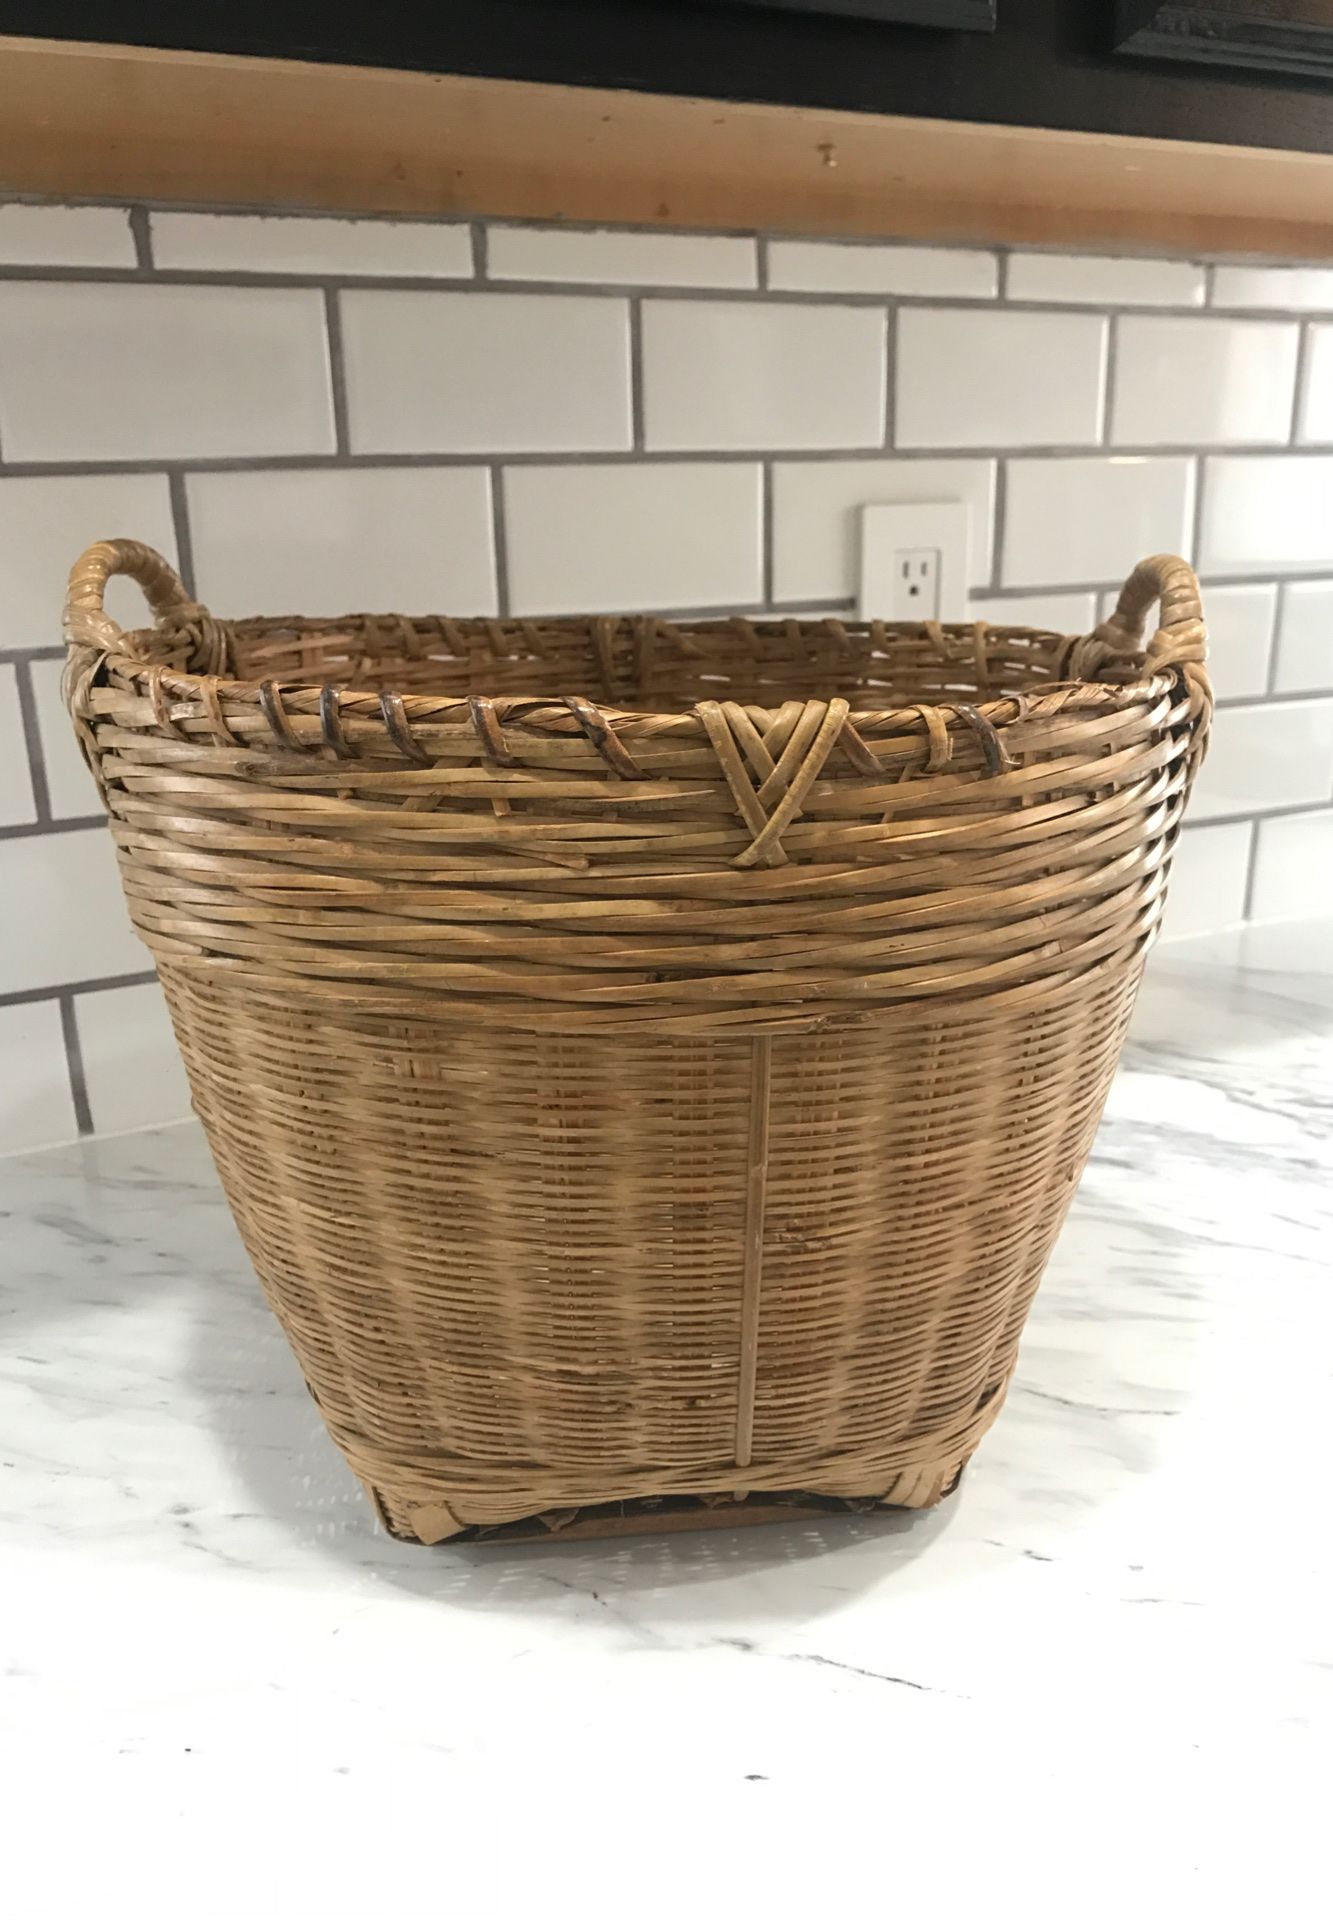 Basket to put a fake palm or real potted plant for that boho look